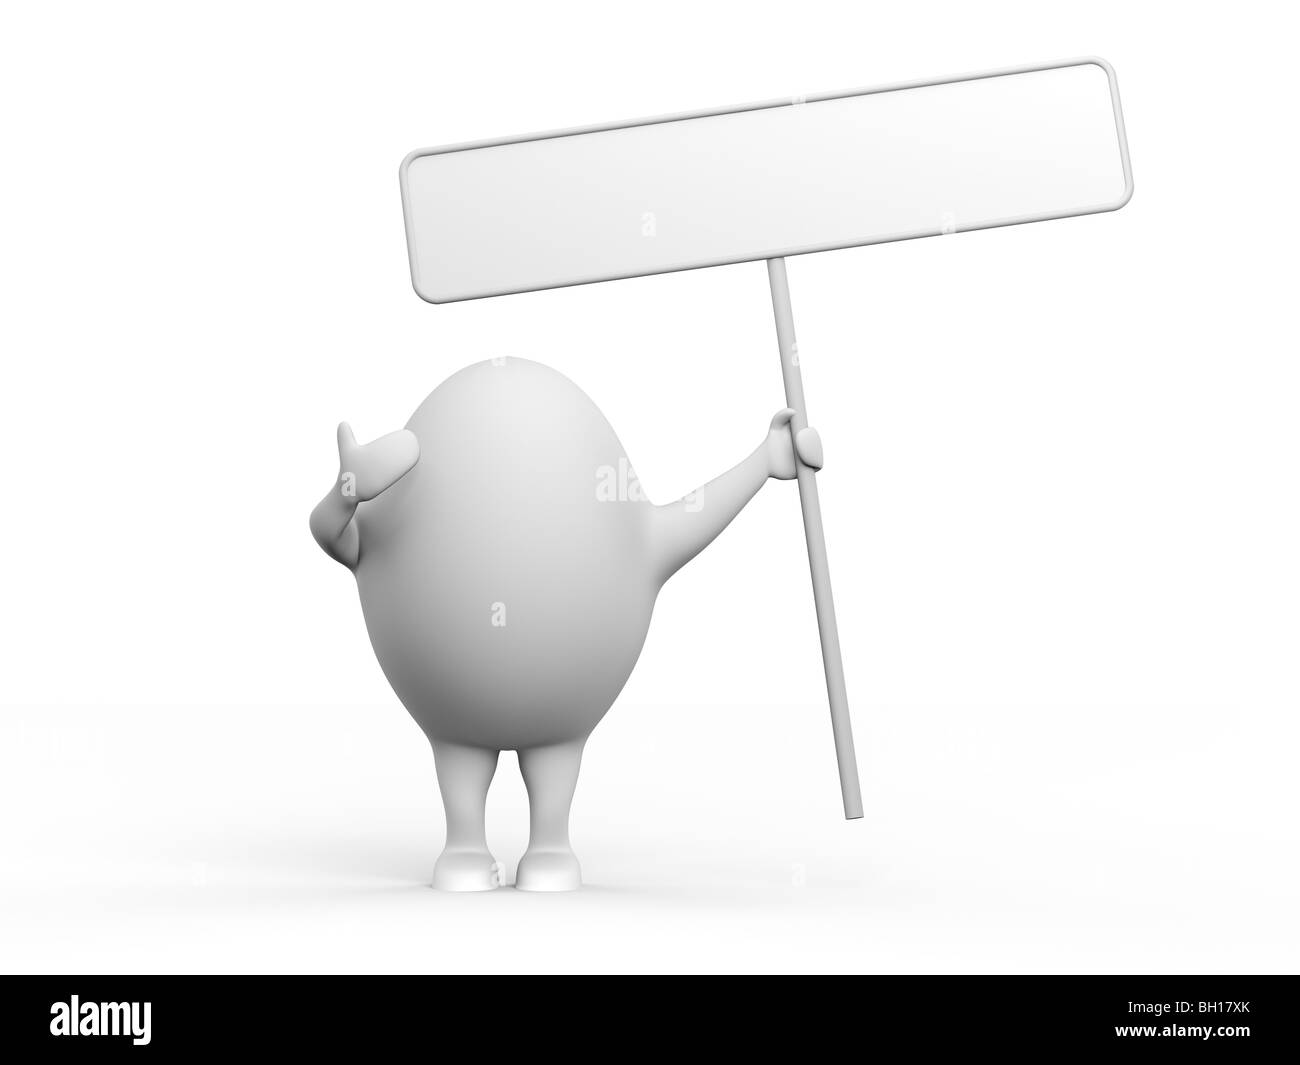 3D illustration of a cartoon egghead character holding a blank sign. Isolated on white background. Stock Photo